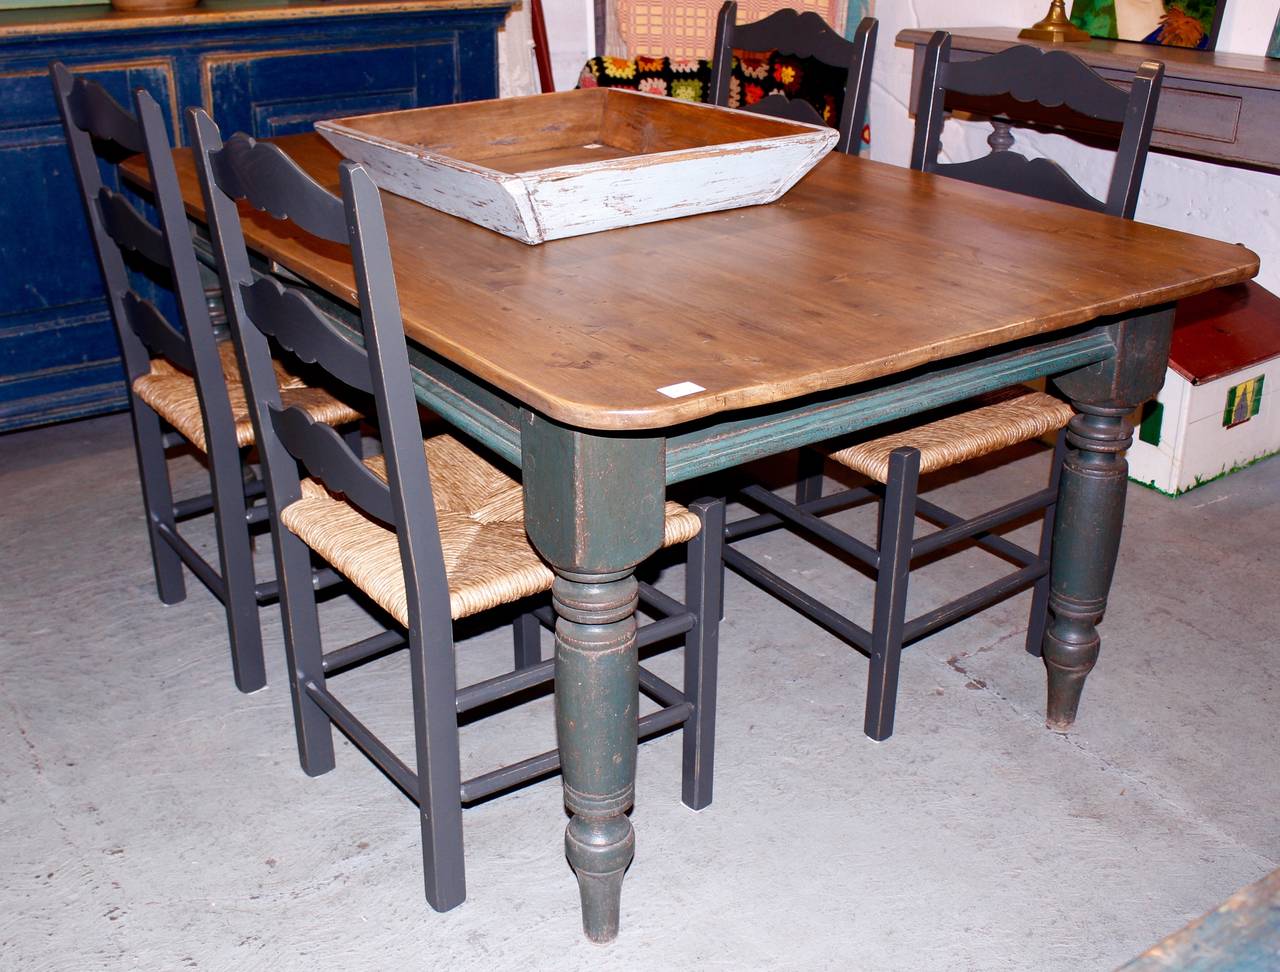 Typical kitchen farm table with turned legs